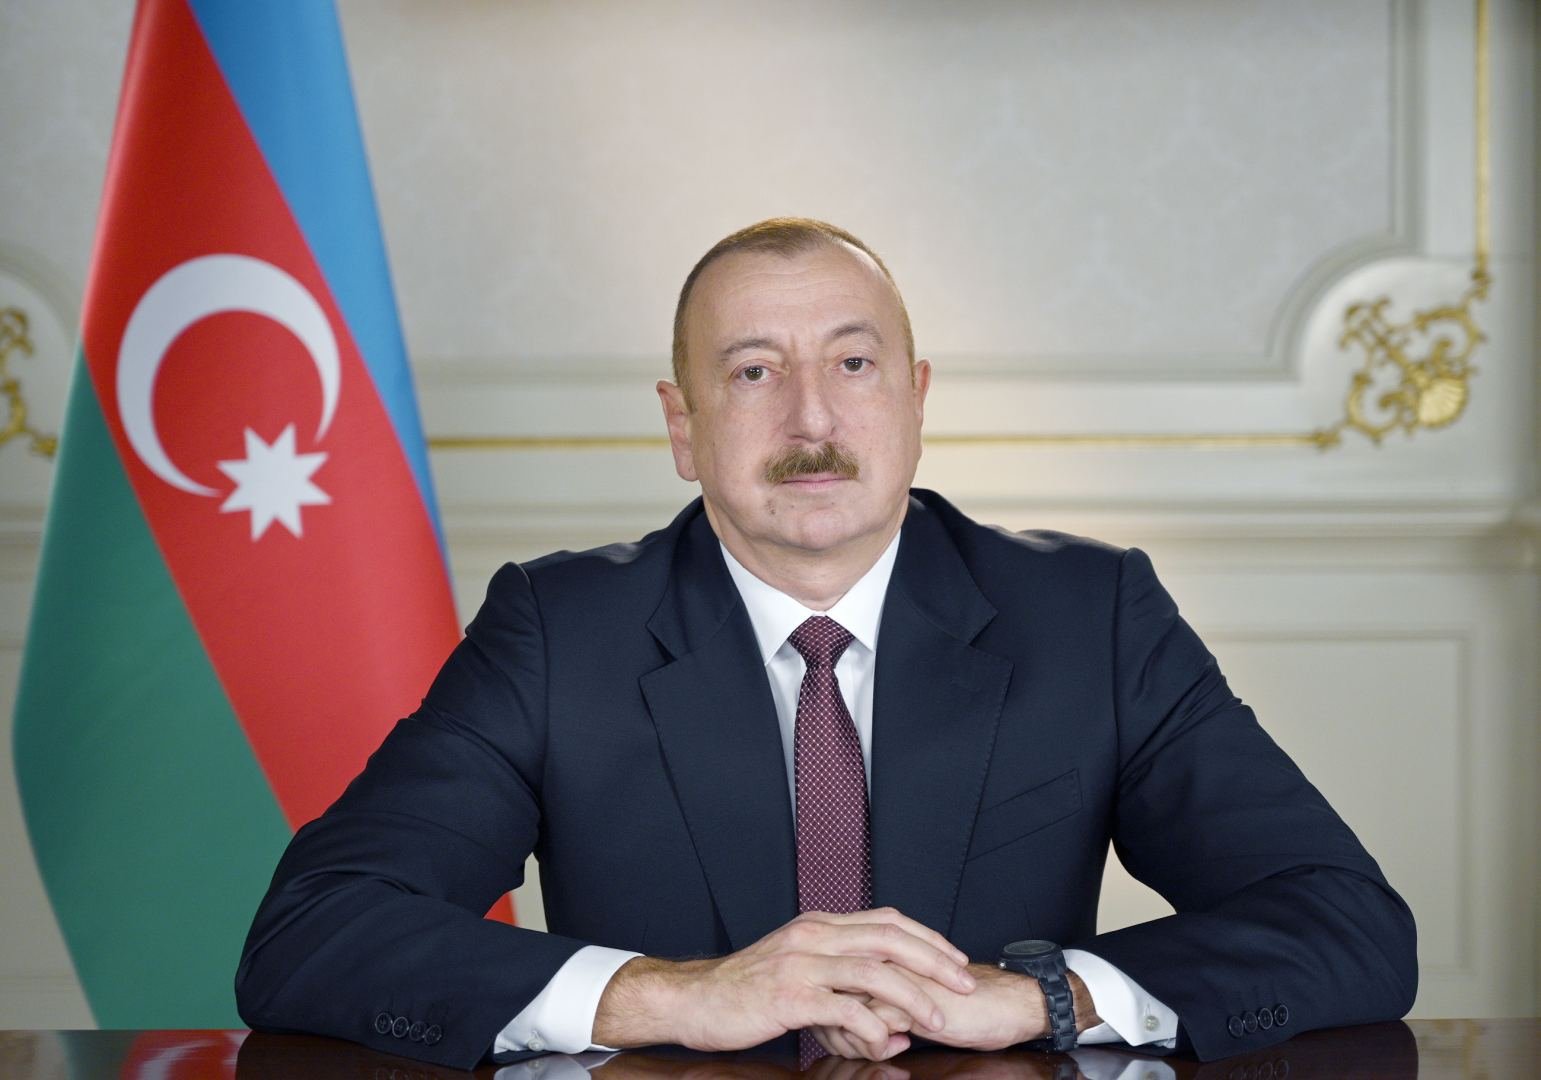 Among current global challenges, problems of peace and security are one of the most urgent issues - President Ilham Aliyev